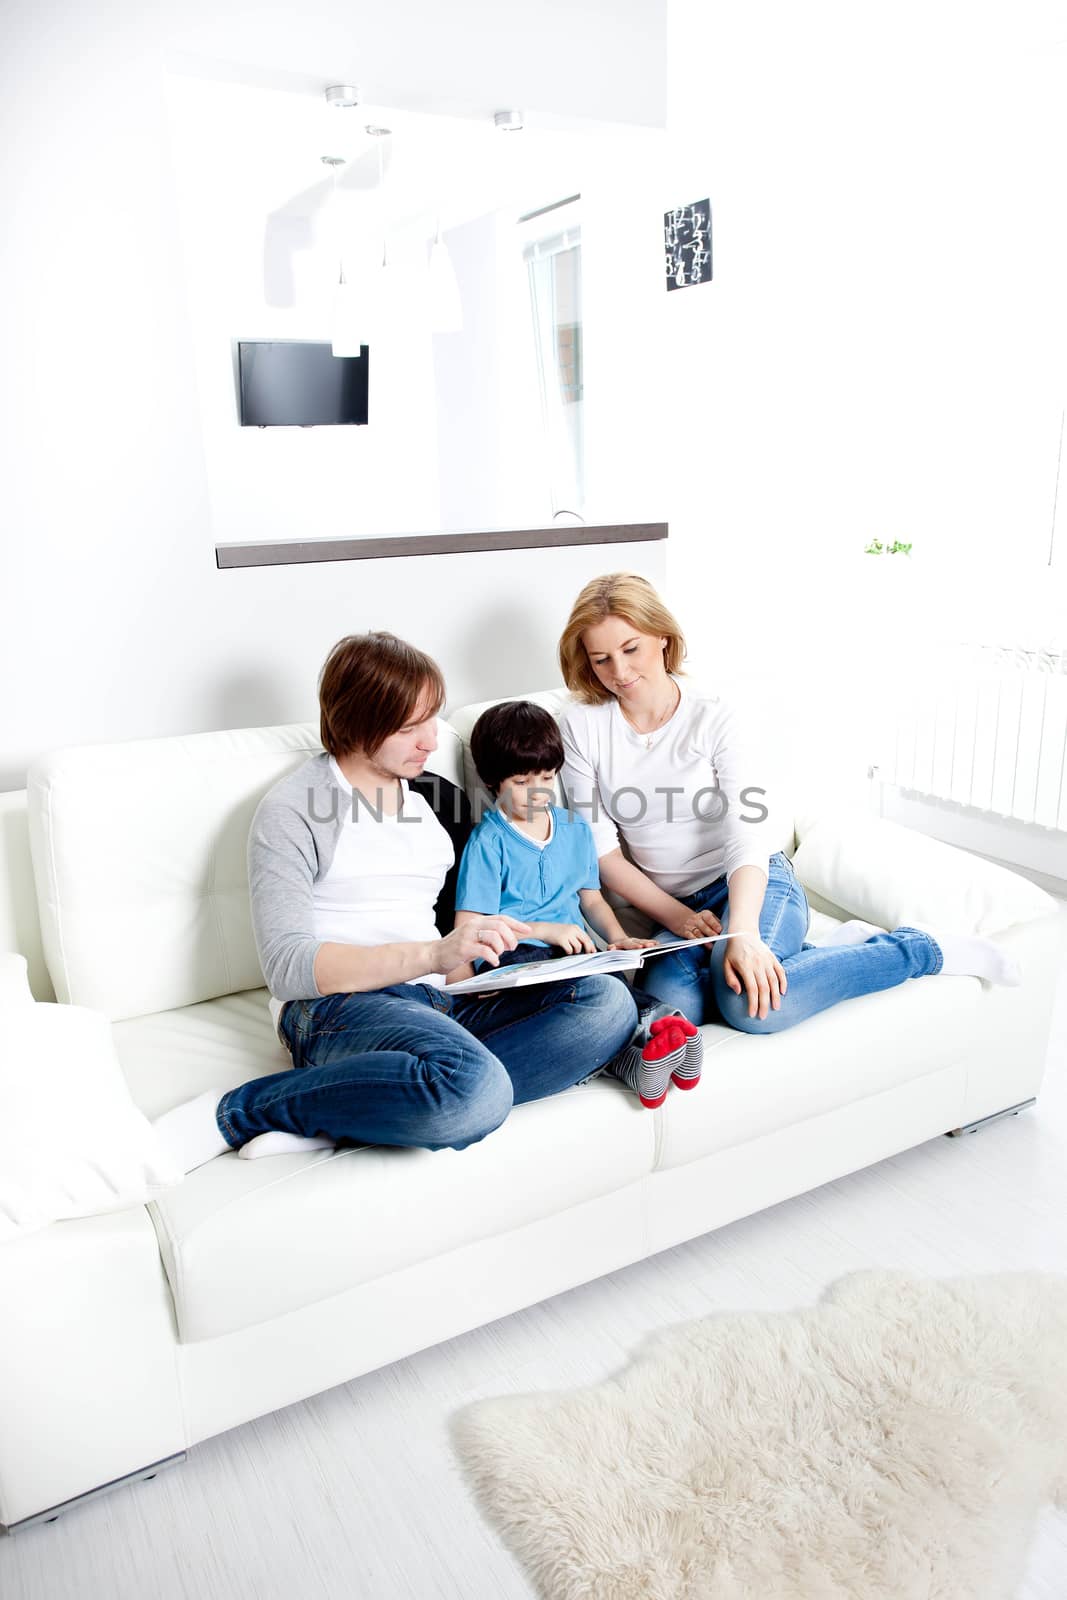 Portrait of friendly family reading book in home